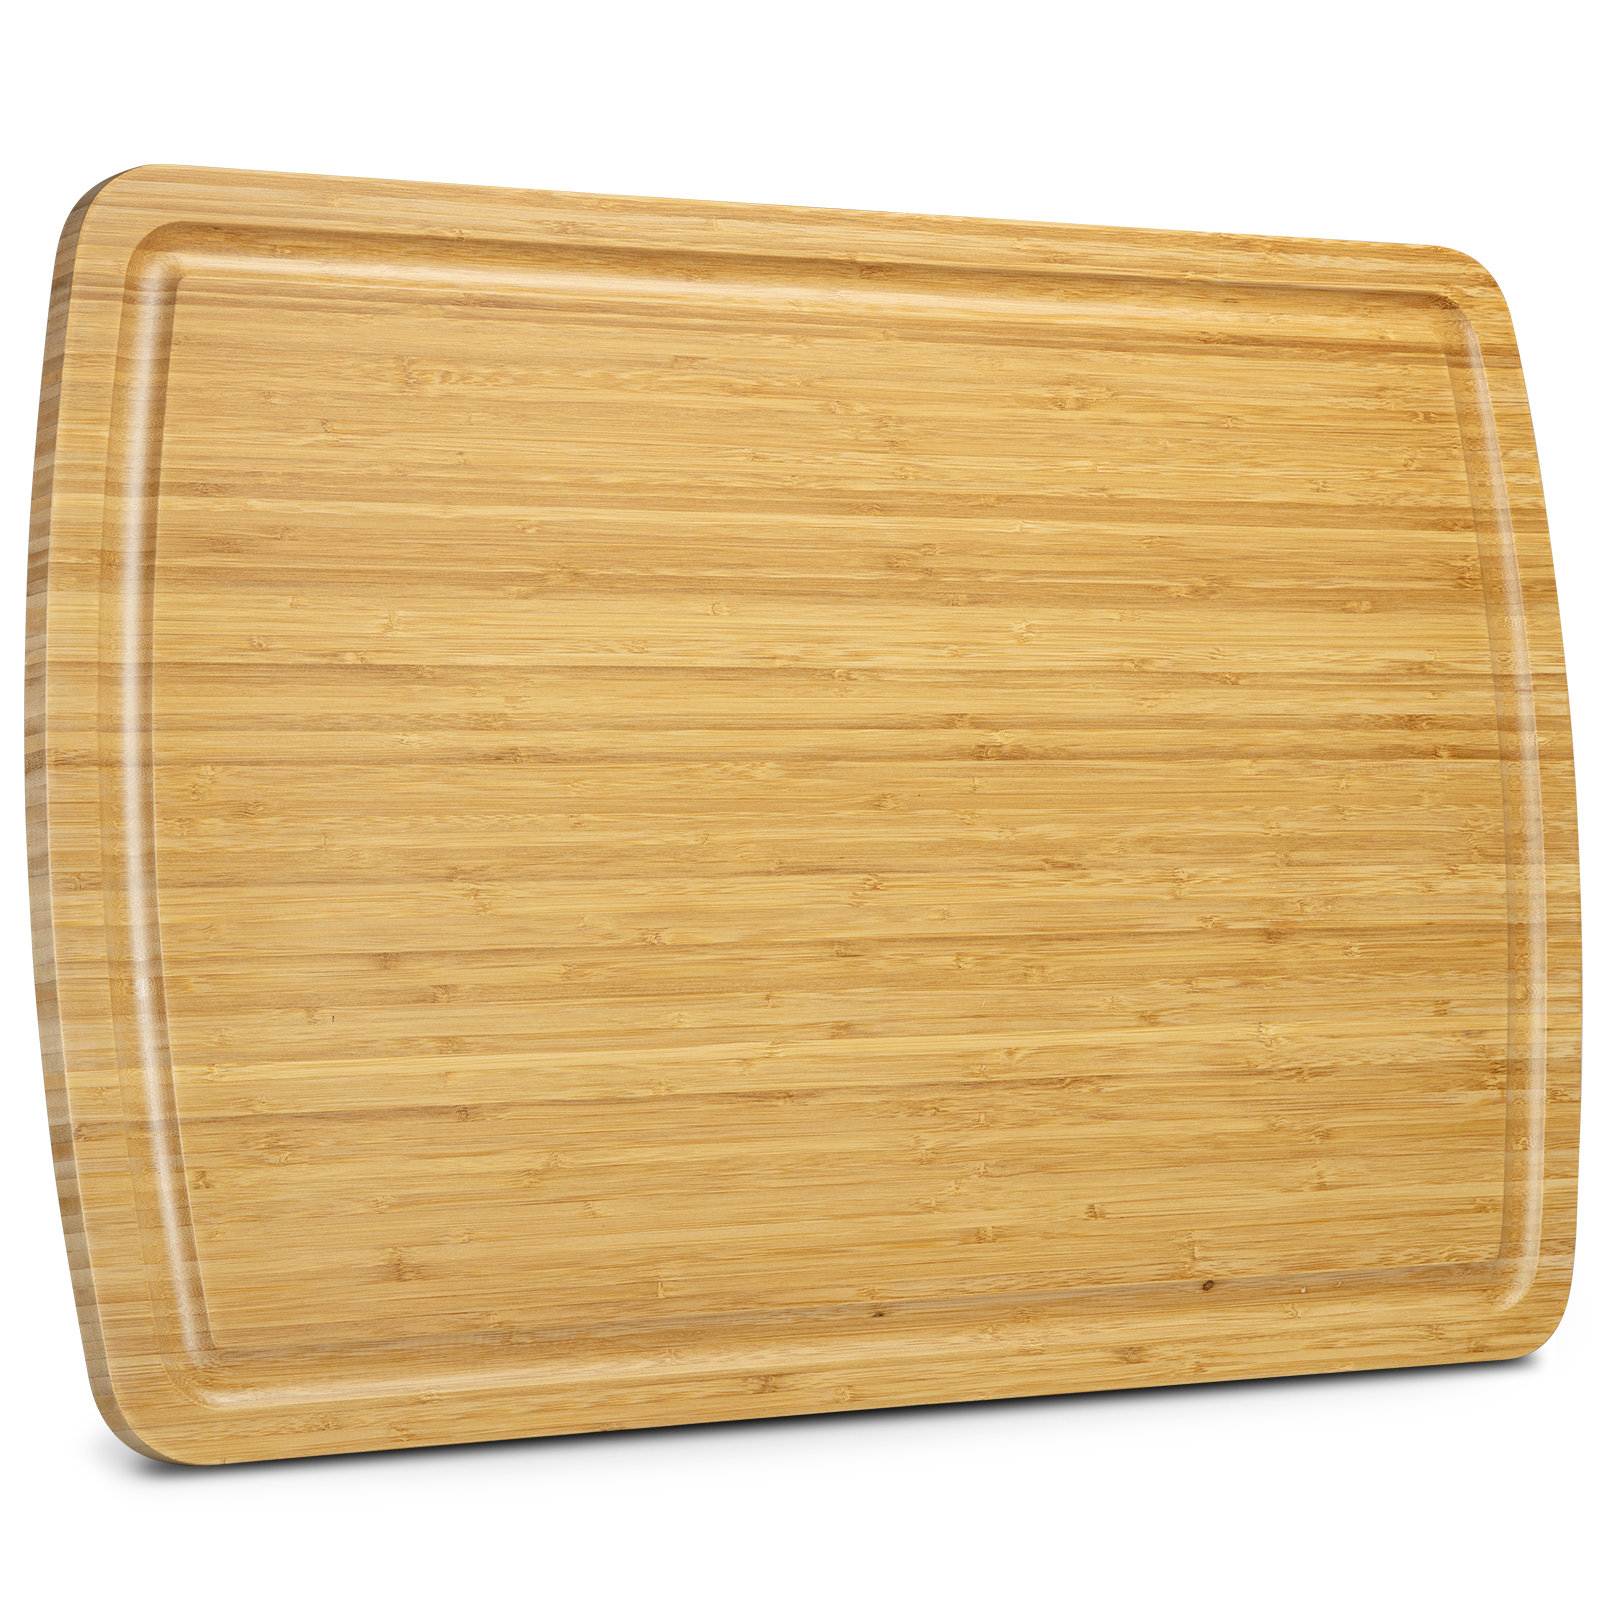 Large Teak Wood Cutting Board for Kitchen with Juice Groove, Reversible Charcuterie Butcher Block Bassetts